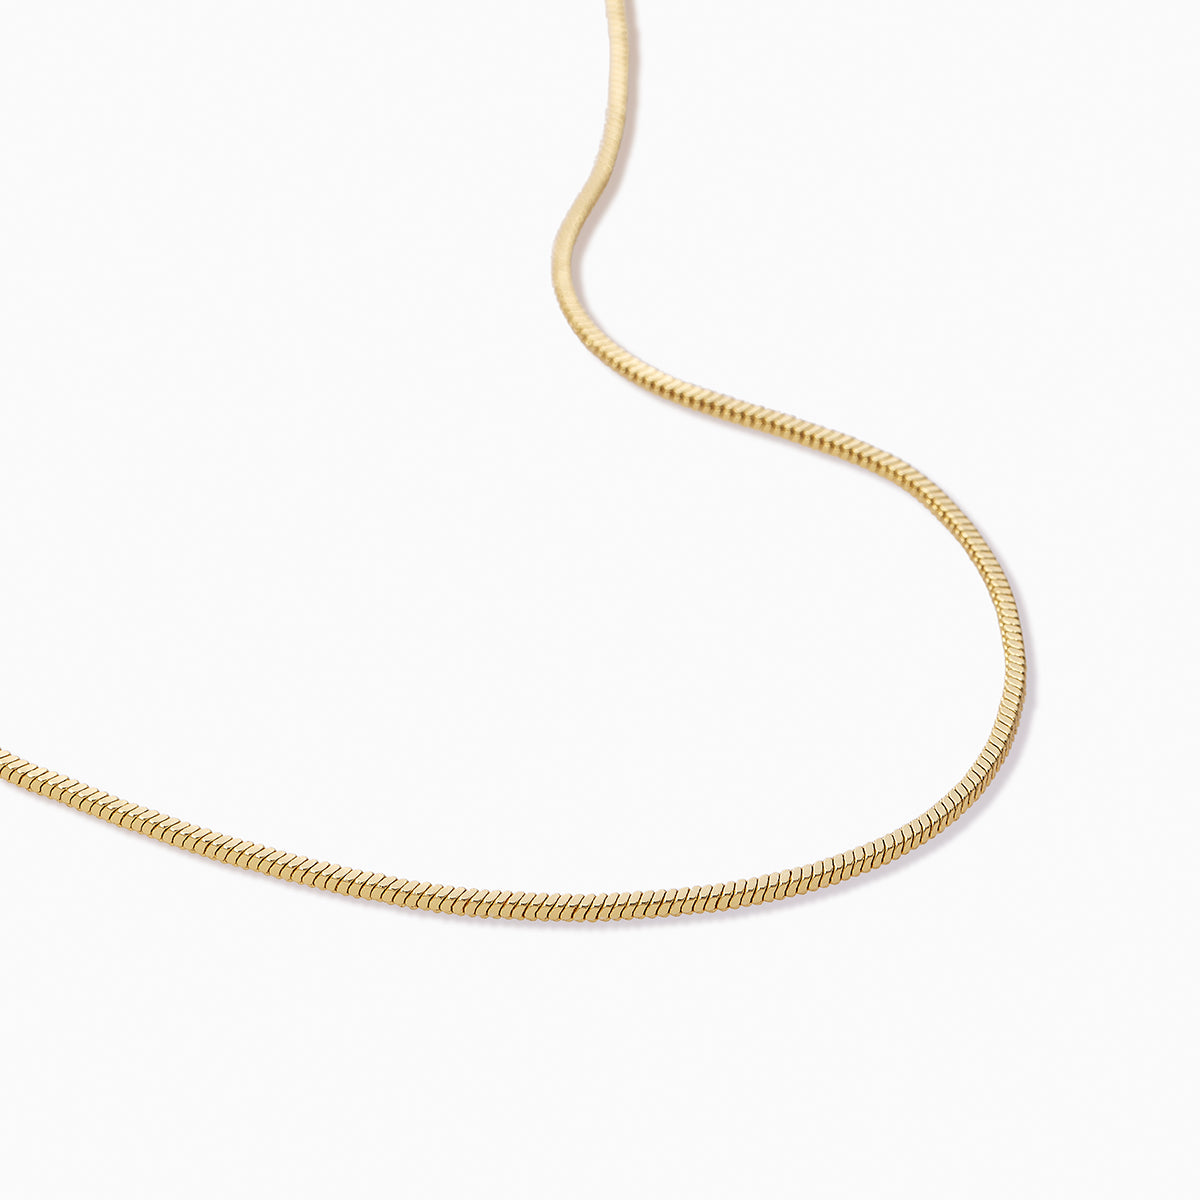 Sure Thing Necklace | Gold | Product Detail Image | Uncommon James